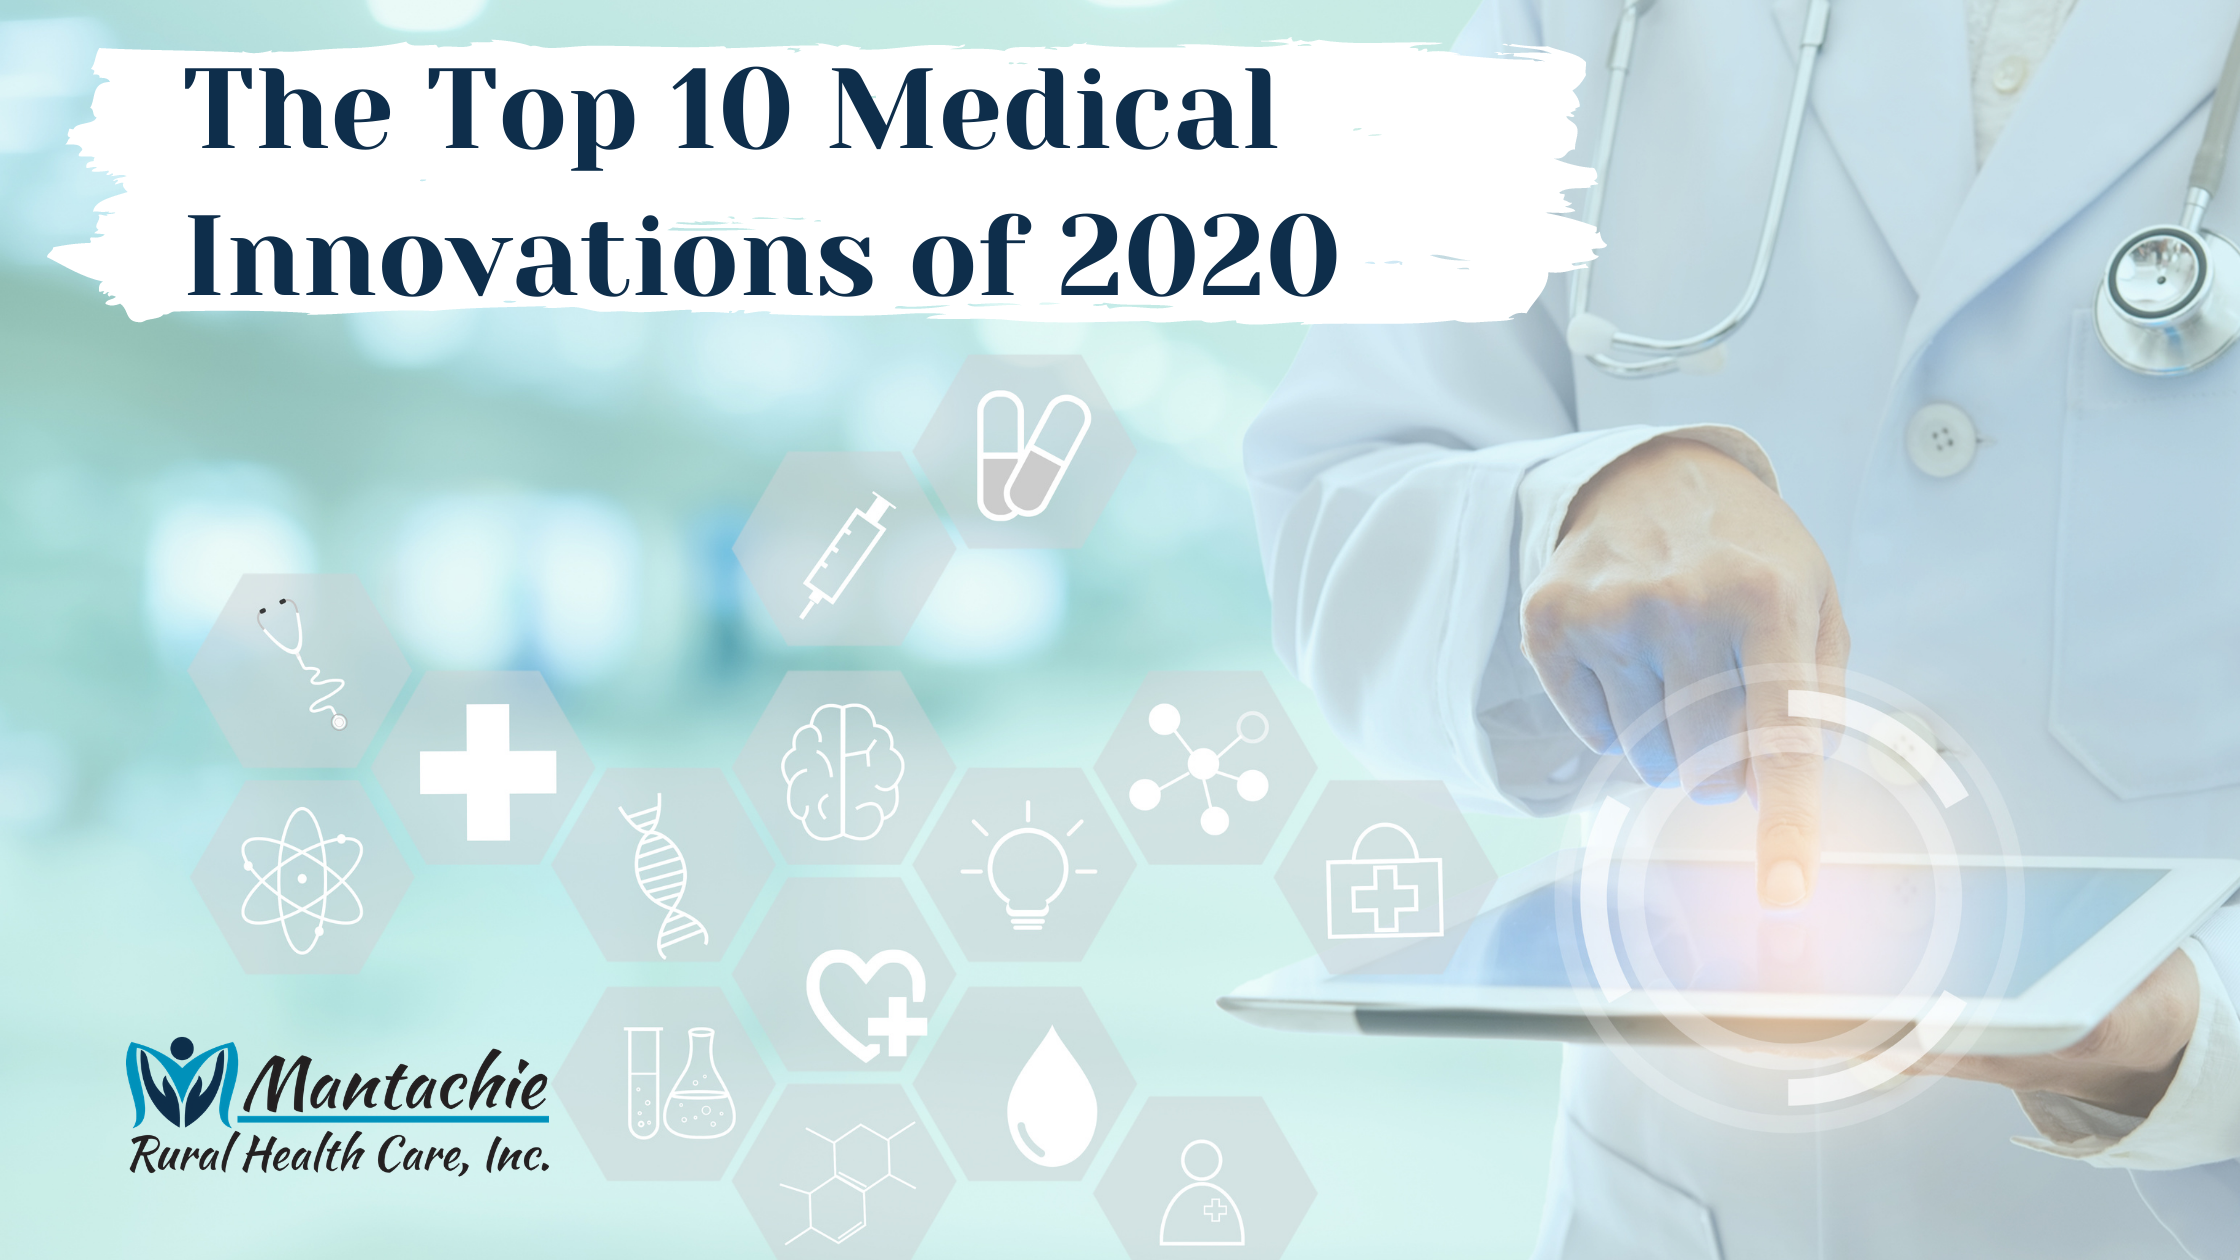 The Top 10 Medical Innovations of 2020